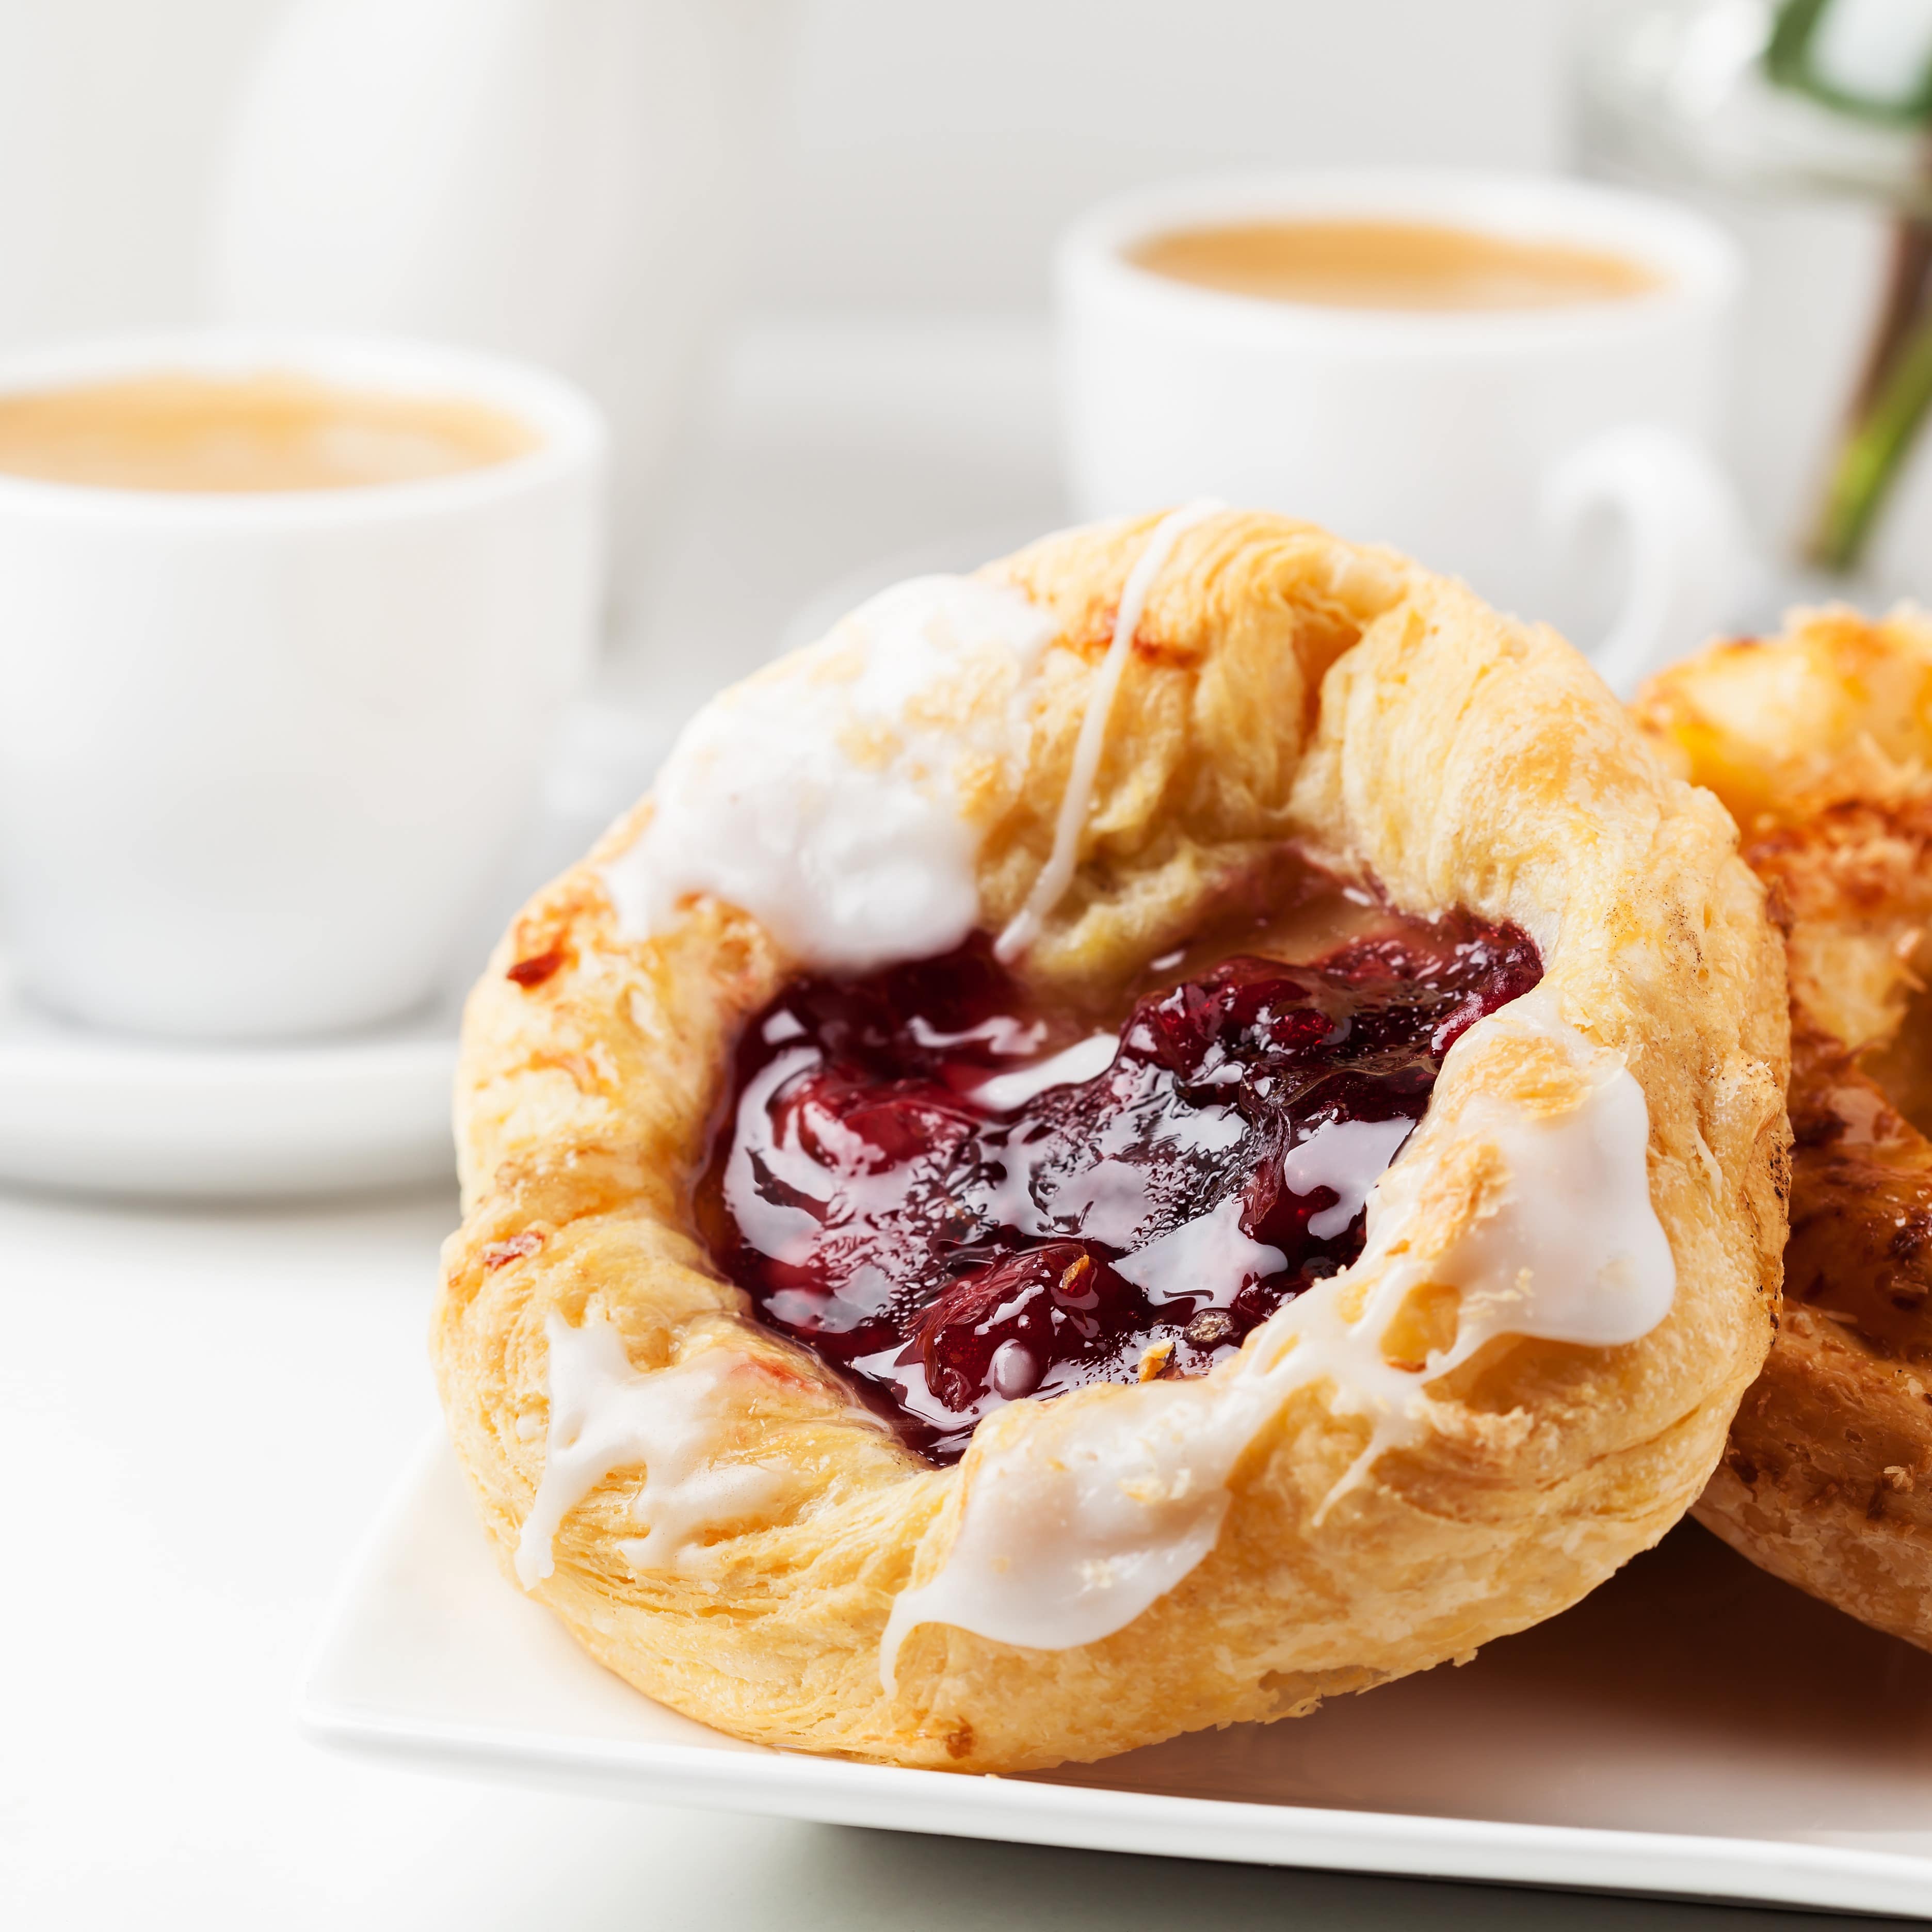 Danish pastries with coffee in background